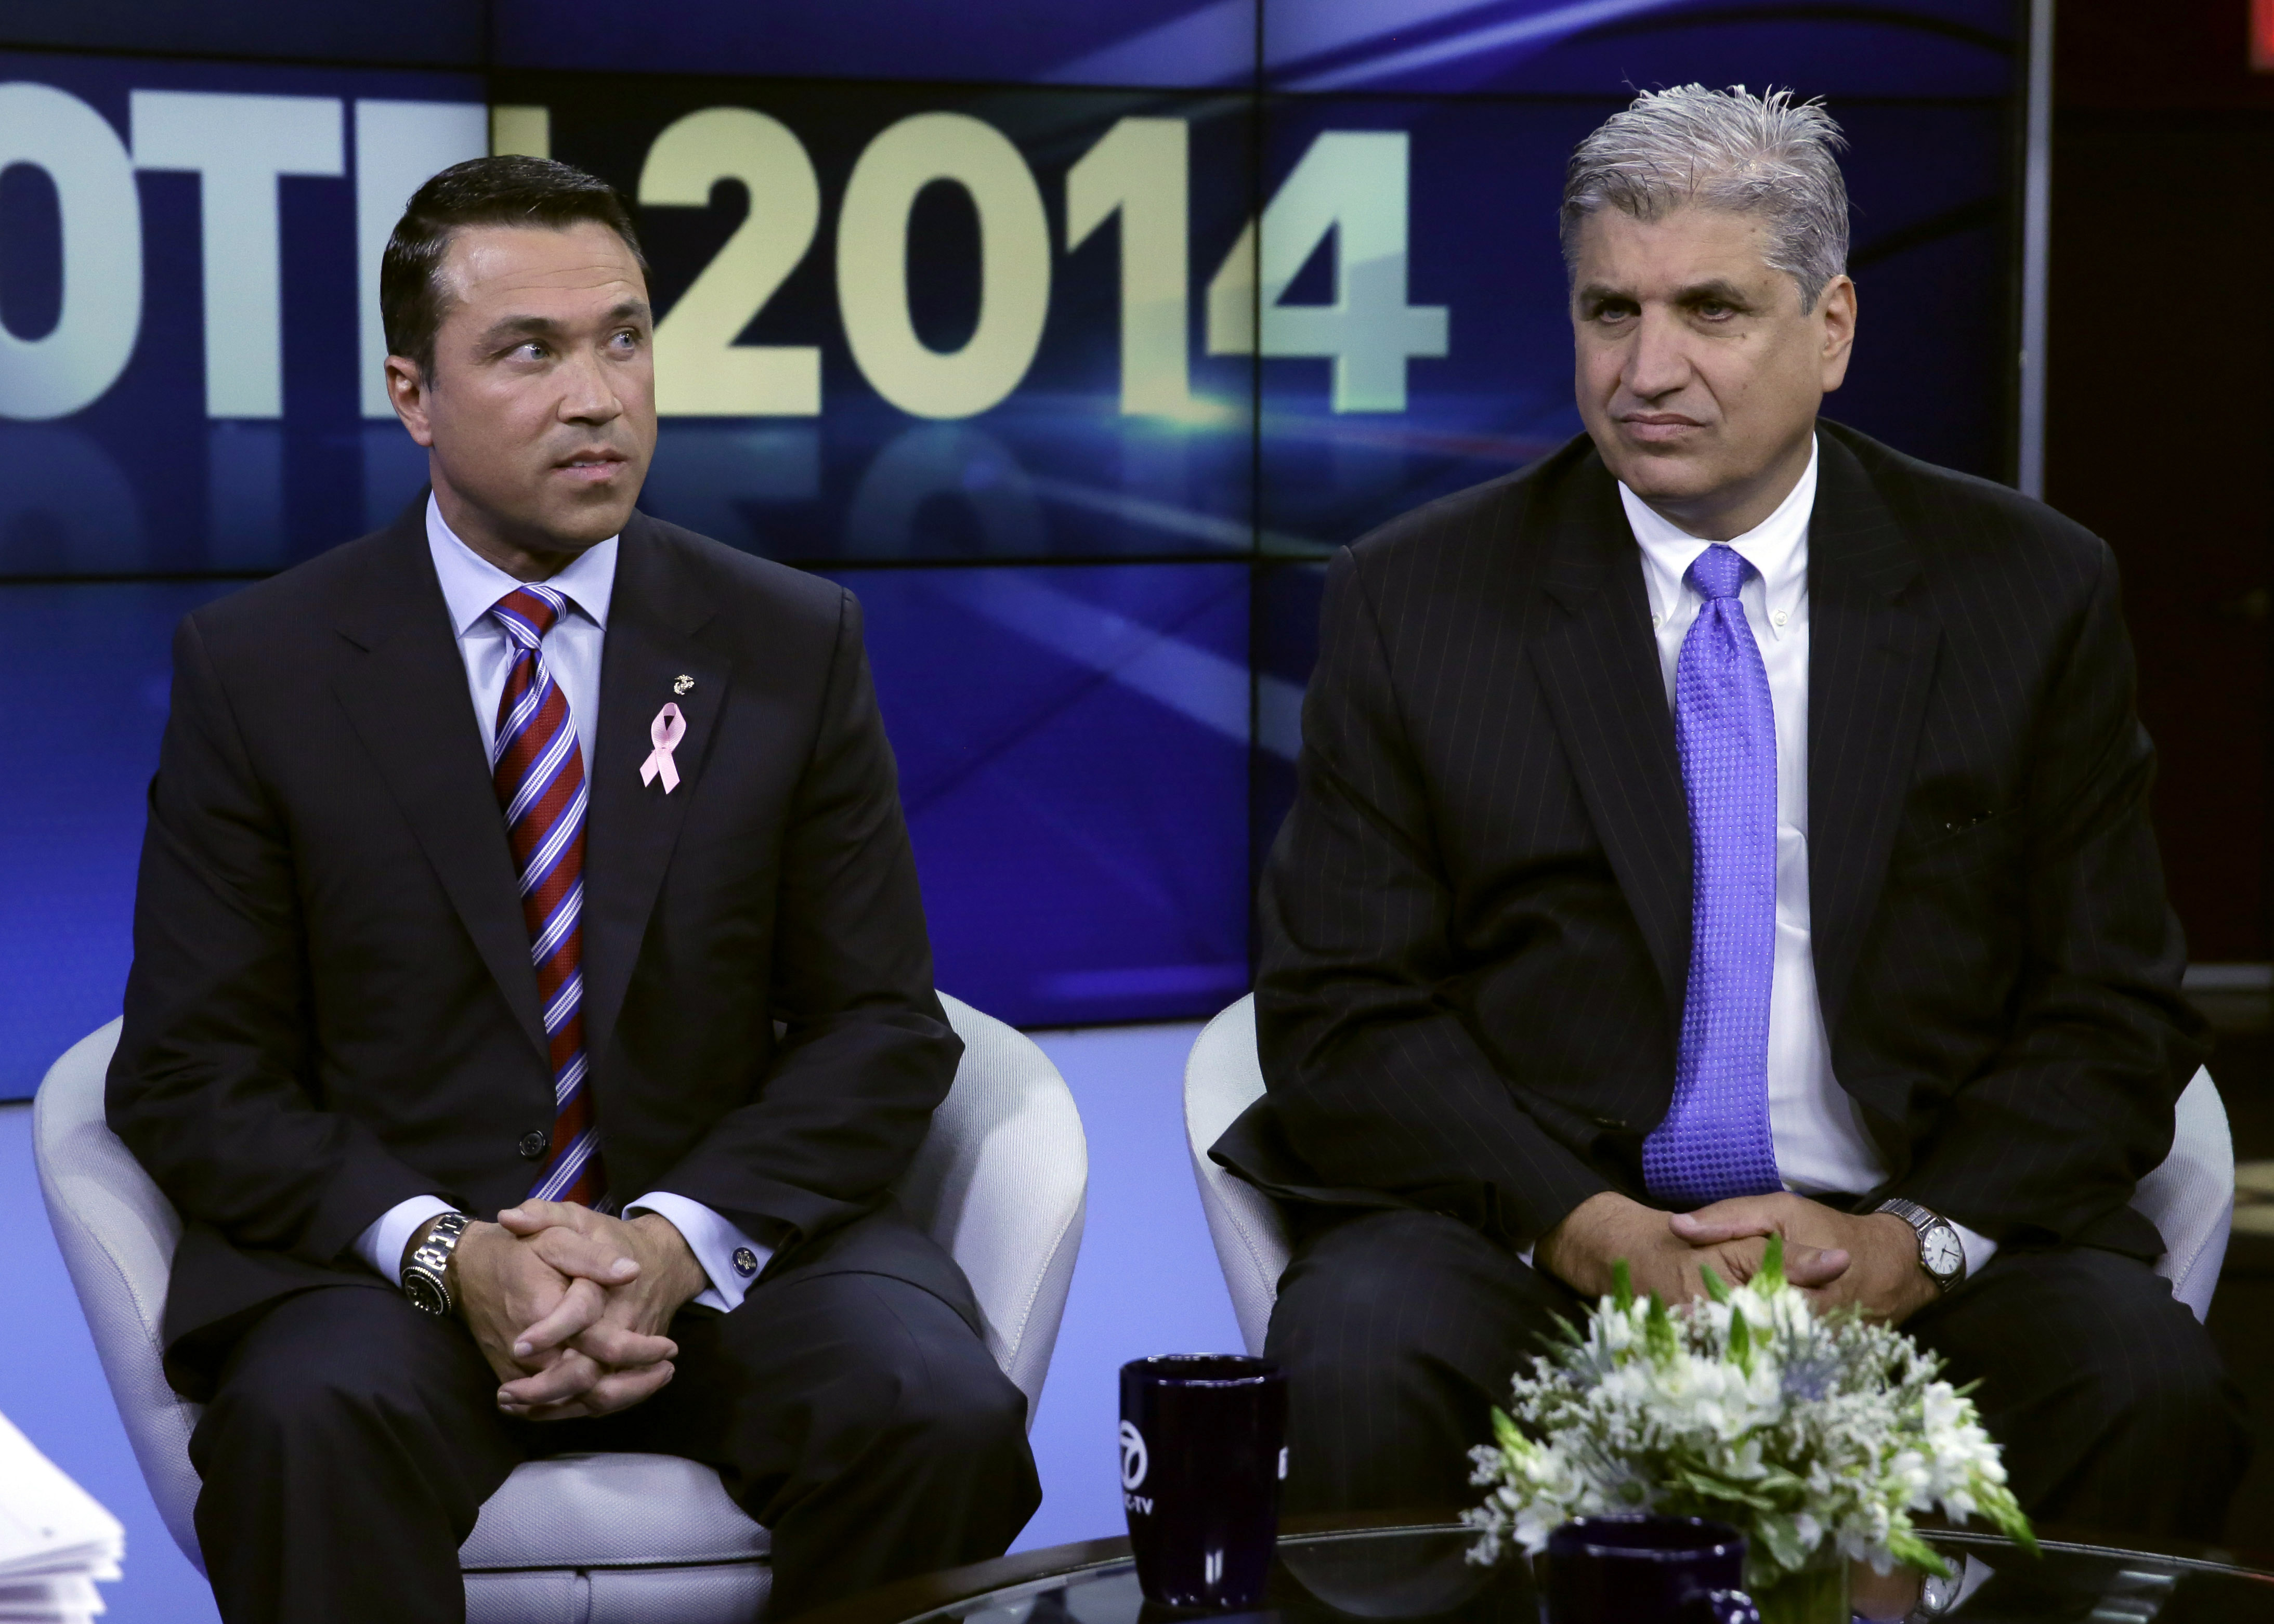 Congressman Michael Grimm and challenger Domenic Recchia at a WABC debate. (Photo by Richard Drew-Pool/Getty Images)